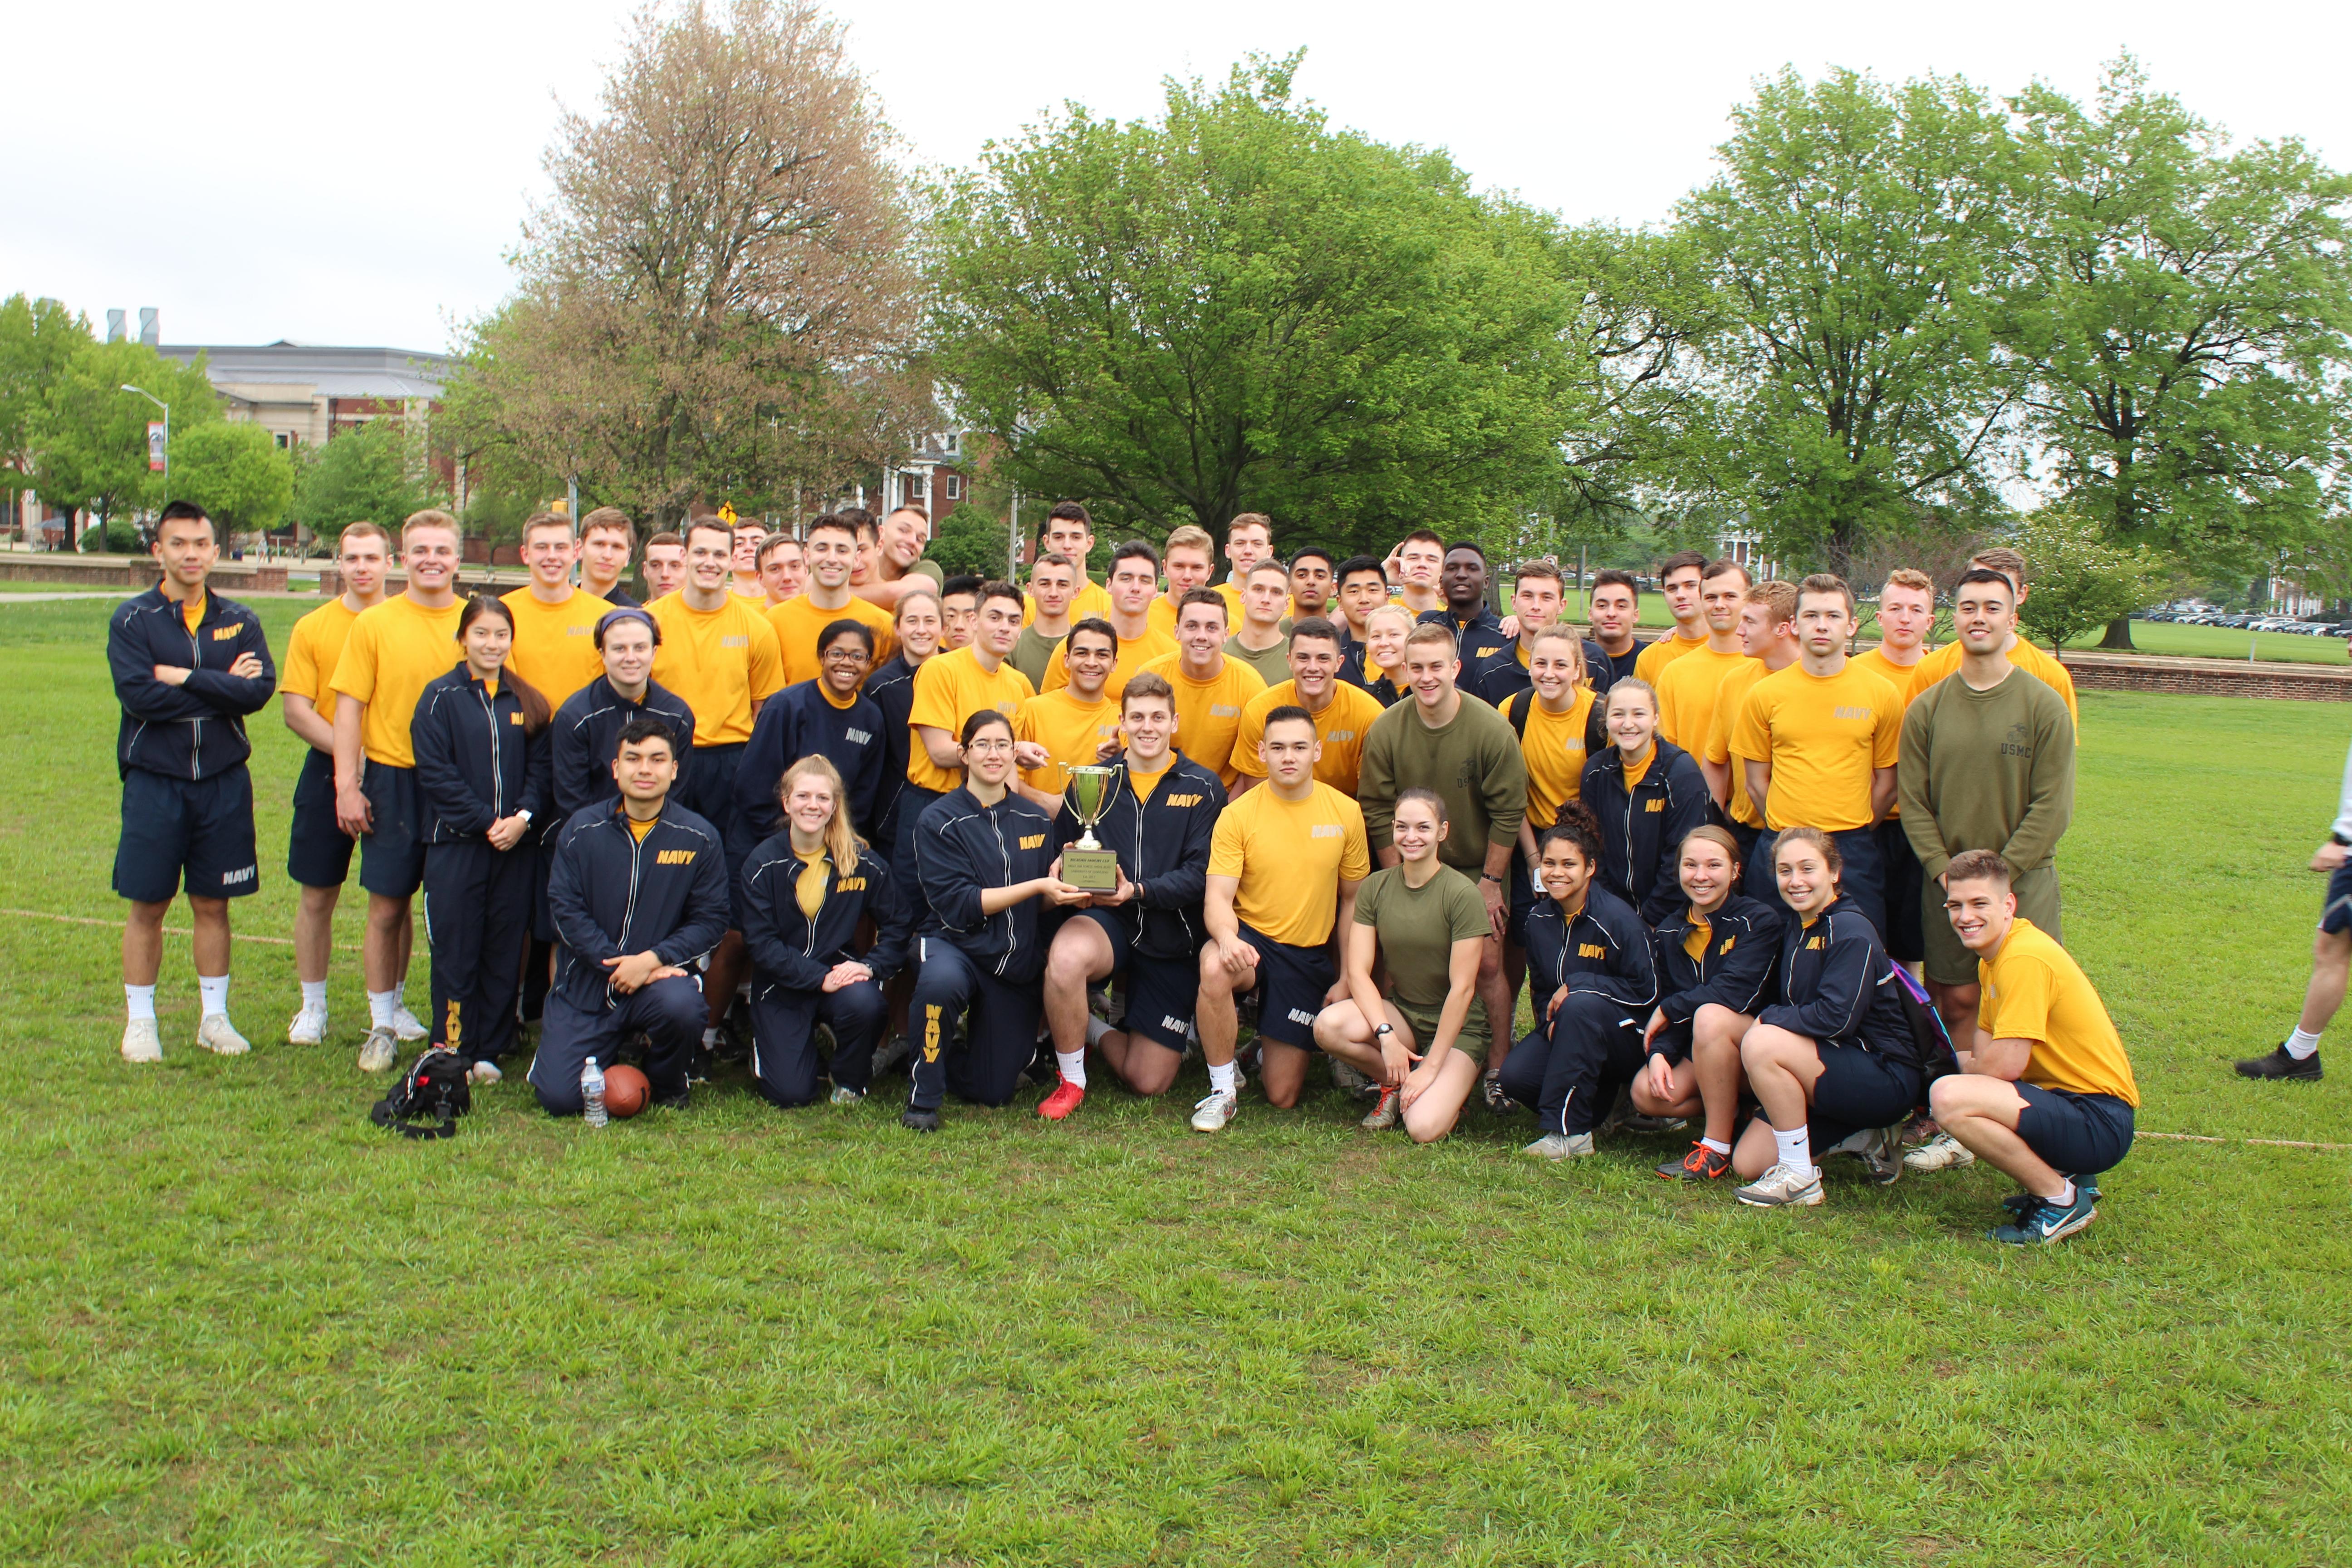 Midshipmen in PT gear on Chapel Fields holding the Armory Cup after beating Army and Air Force ROTC